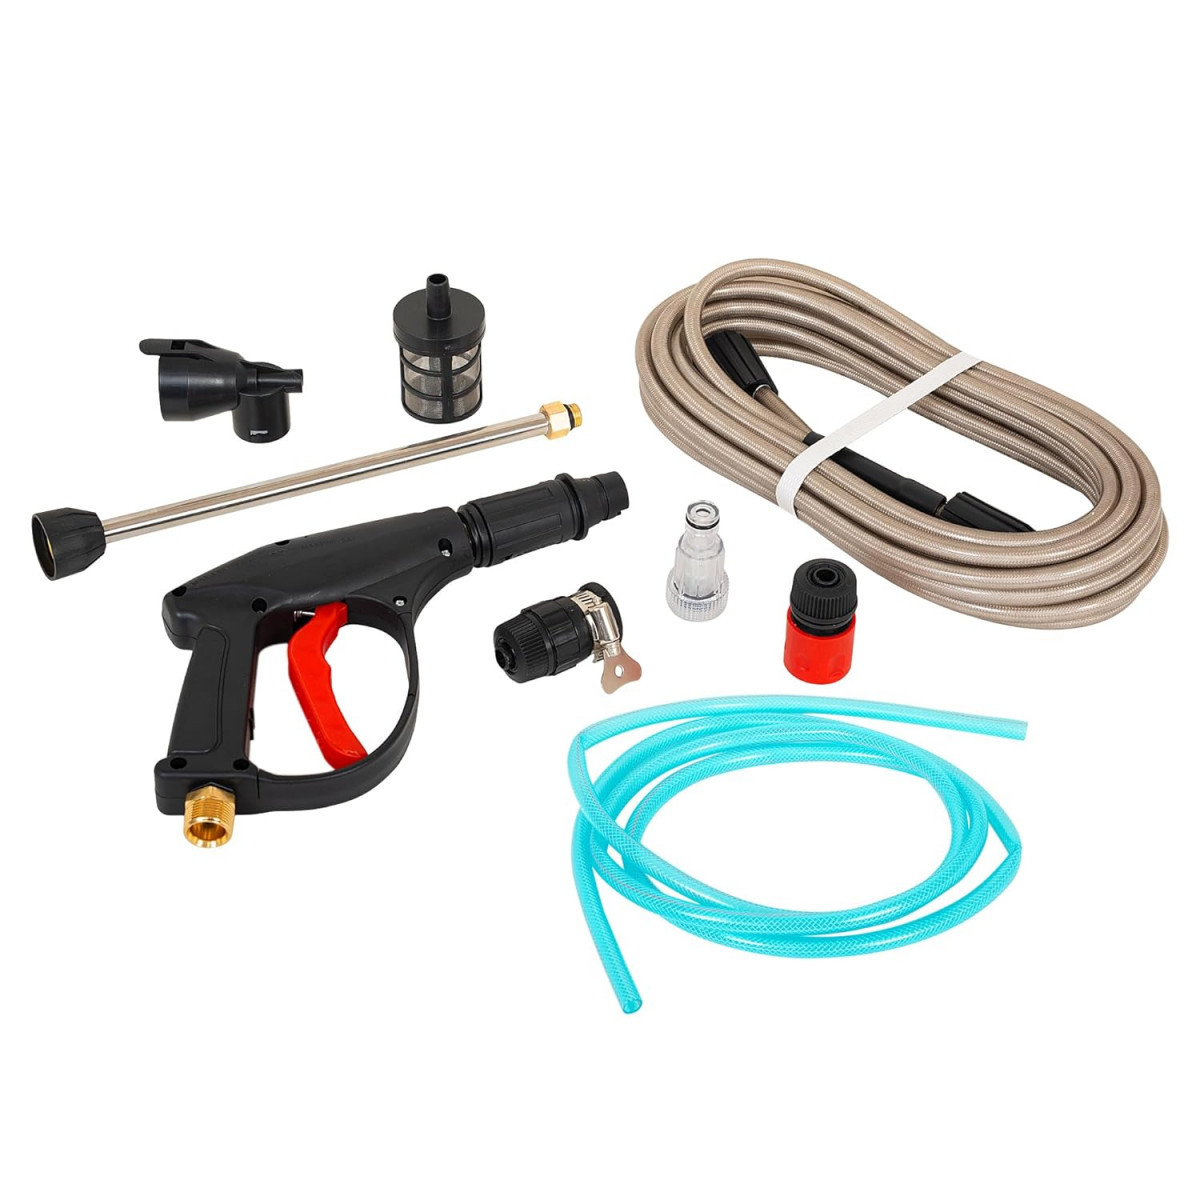 AMERICAN MICRONIC INSTRUMENTS-High Pressure Washer 1800 Watts 135 Bars 65LMin Flow Rate 8 Meters Outlet Hose Isi Marked 4 Meter Wire And Plug-Black And Red